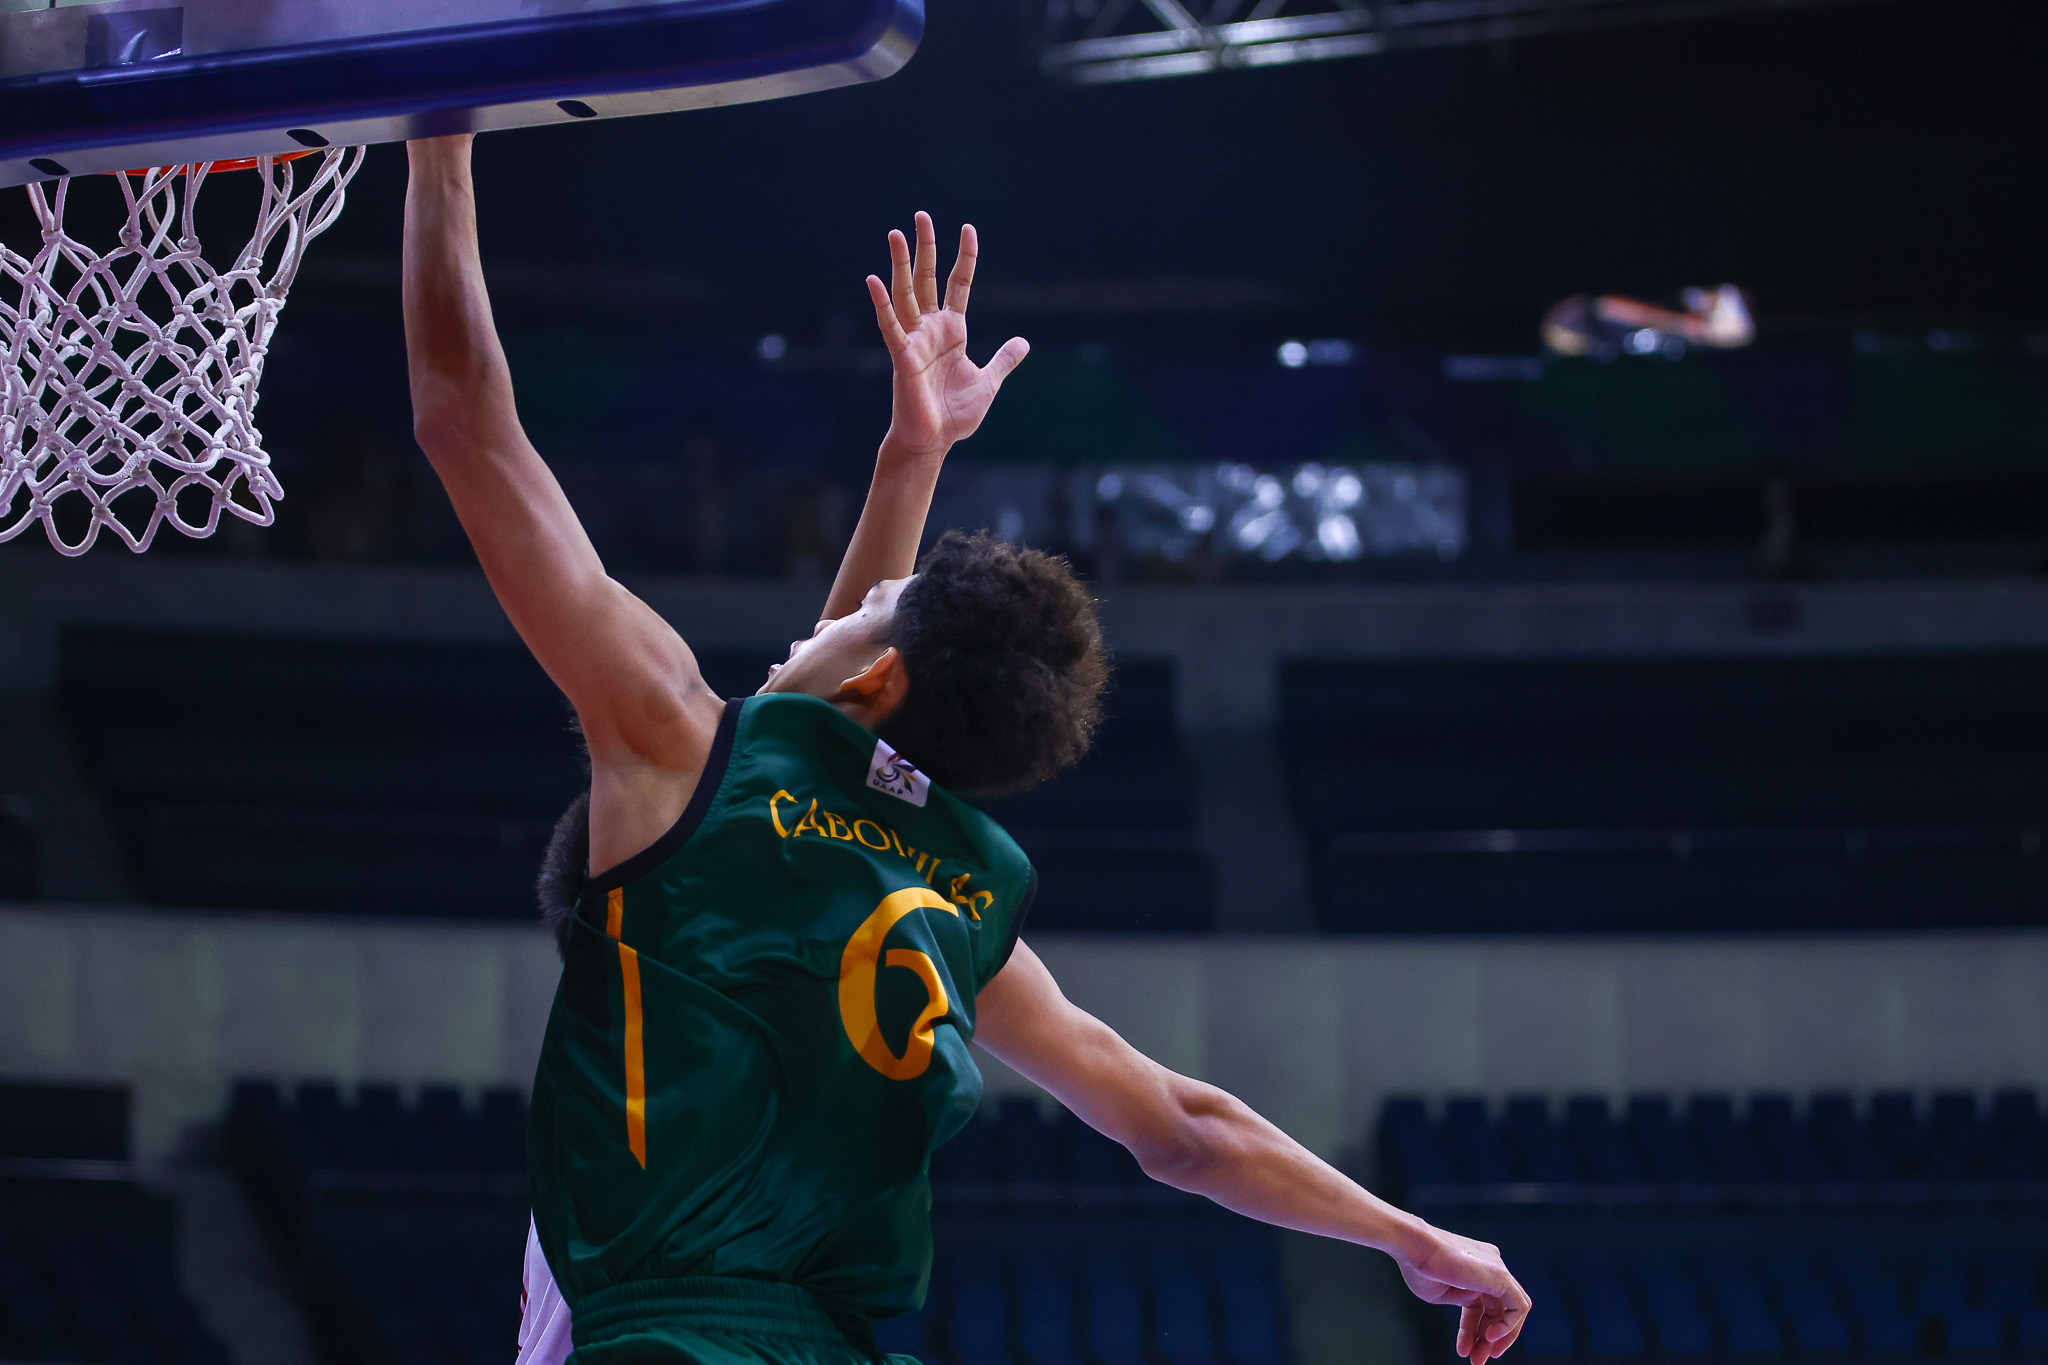 UAAP-86-HS-Basketball-UPIS-vs-FEU-D-Cabs-Cabonilas-4 UAAP 86 HSBB: Dungo, UST withstand Alas flurry, take share of 2nd Basketball DLSU FEU News UAAP UP UST  - philippine sports news